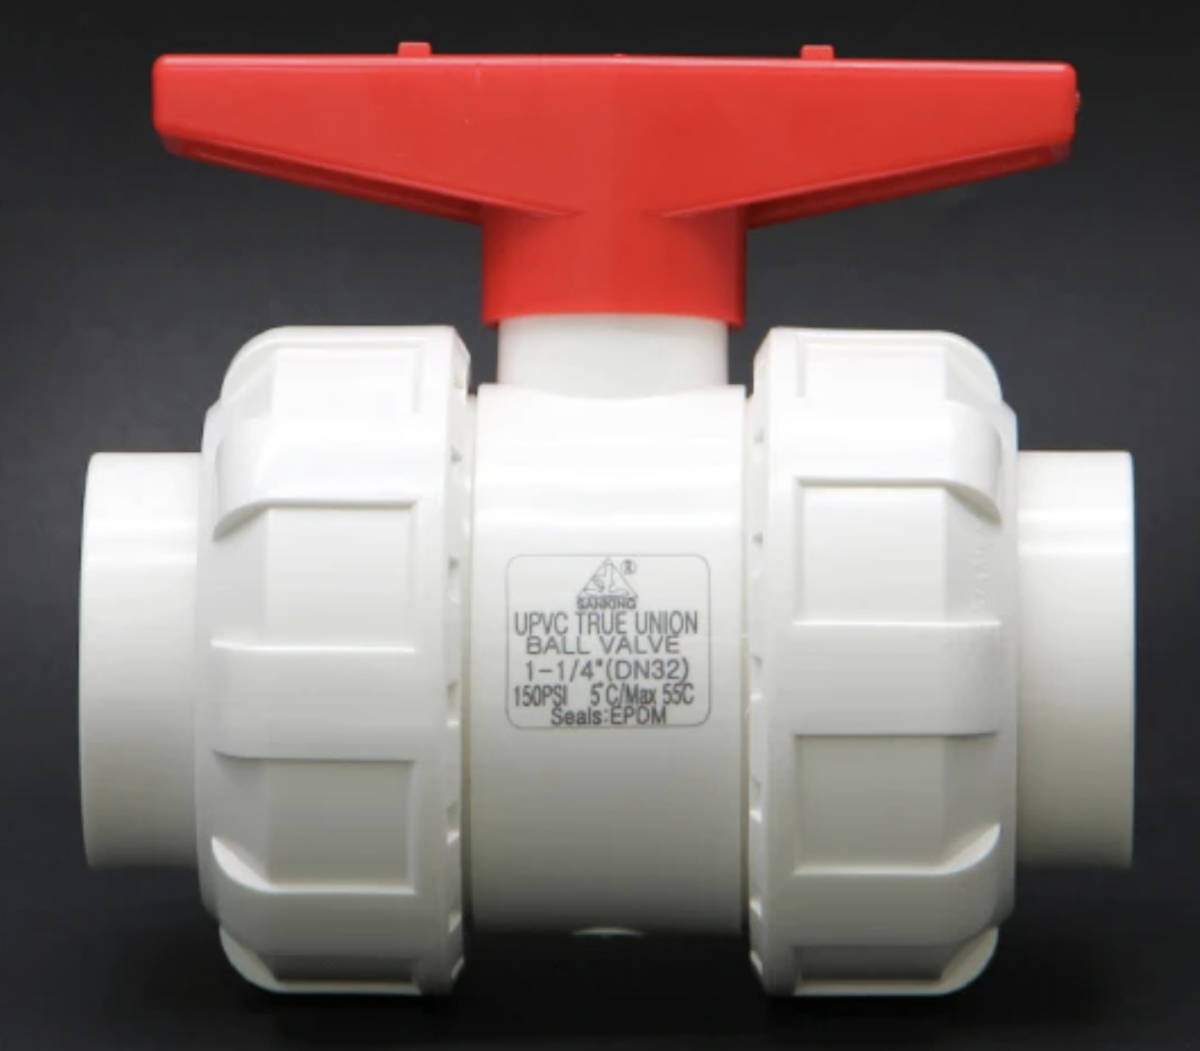  overflow aquarium for divergence piping color piping W Union ball valve(bulb) attaching [ free shipping ]